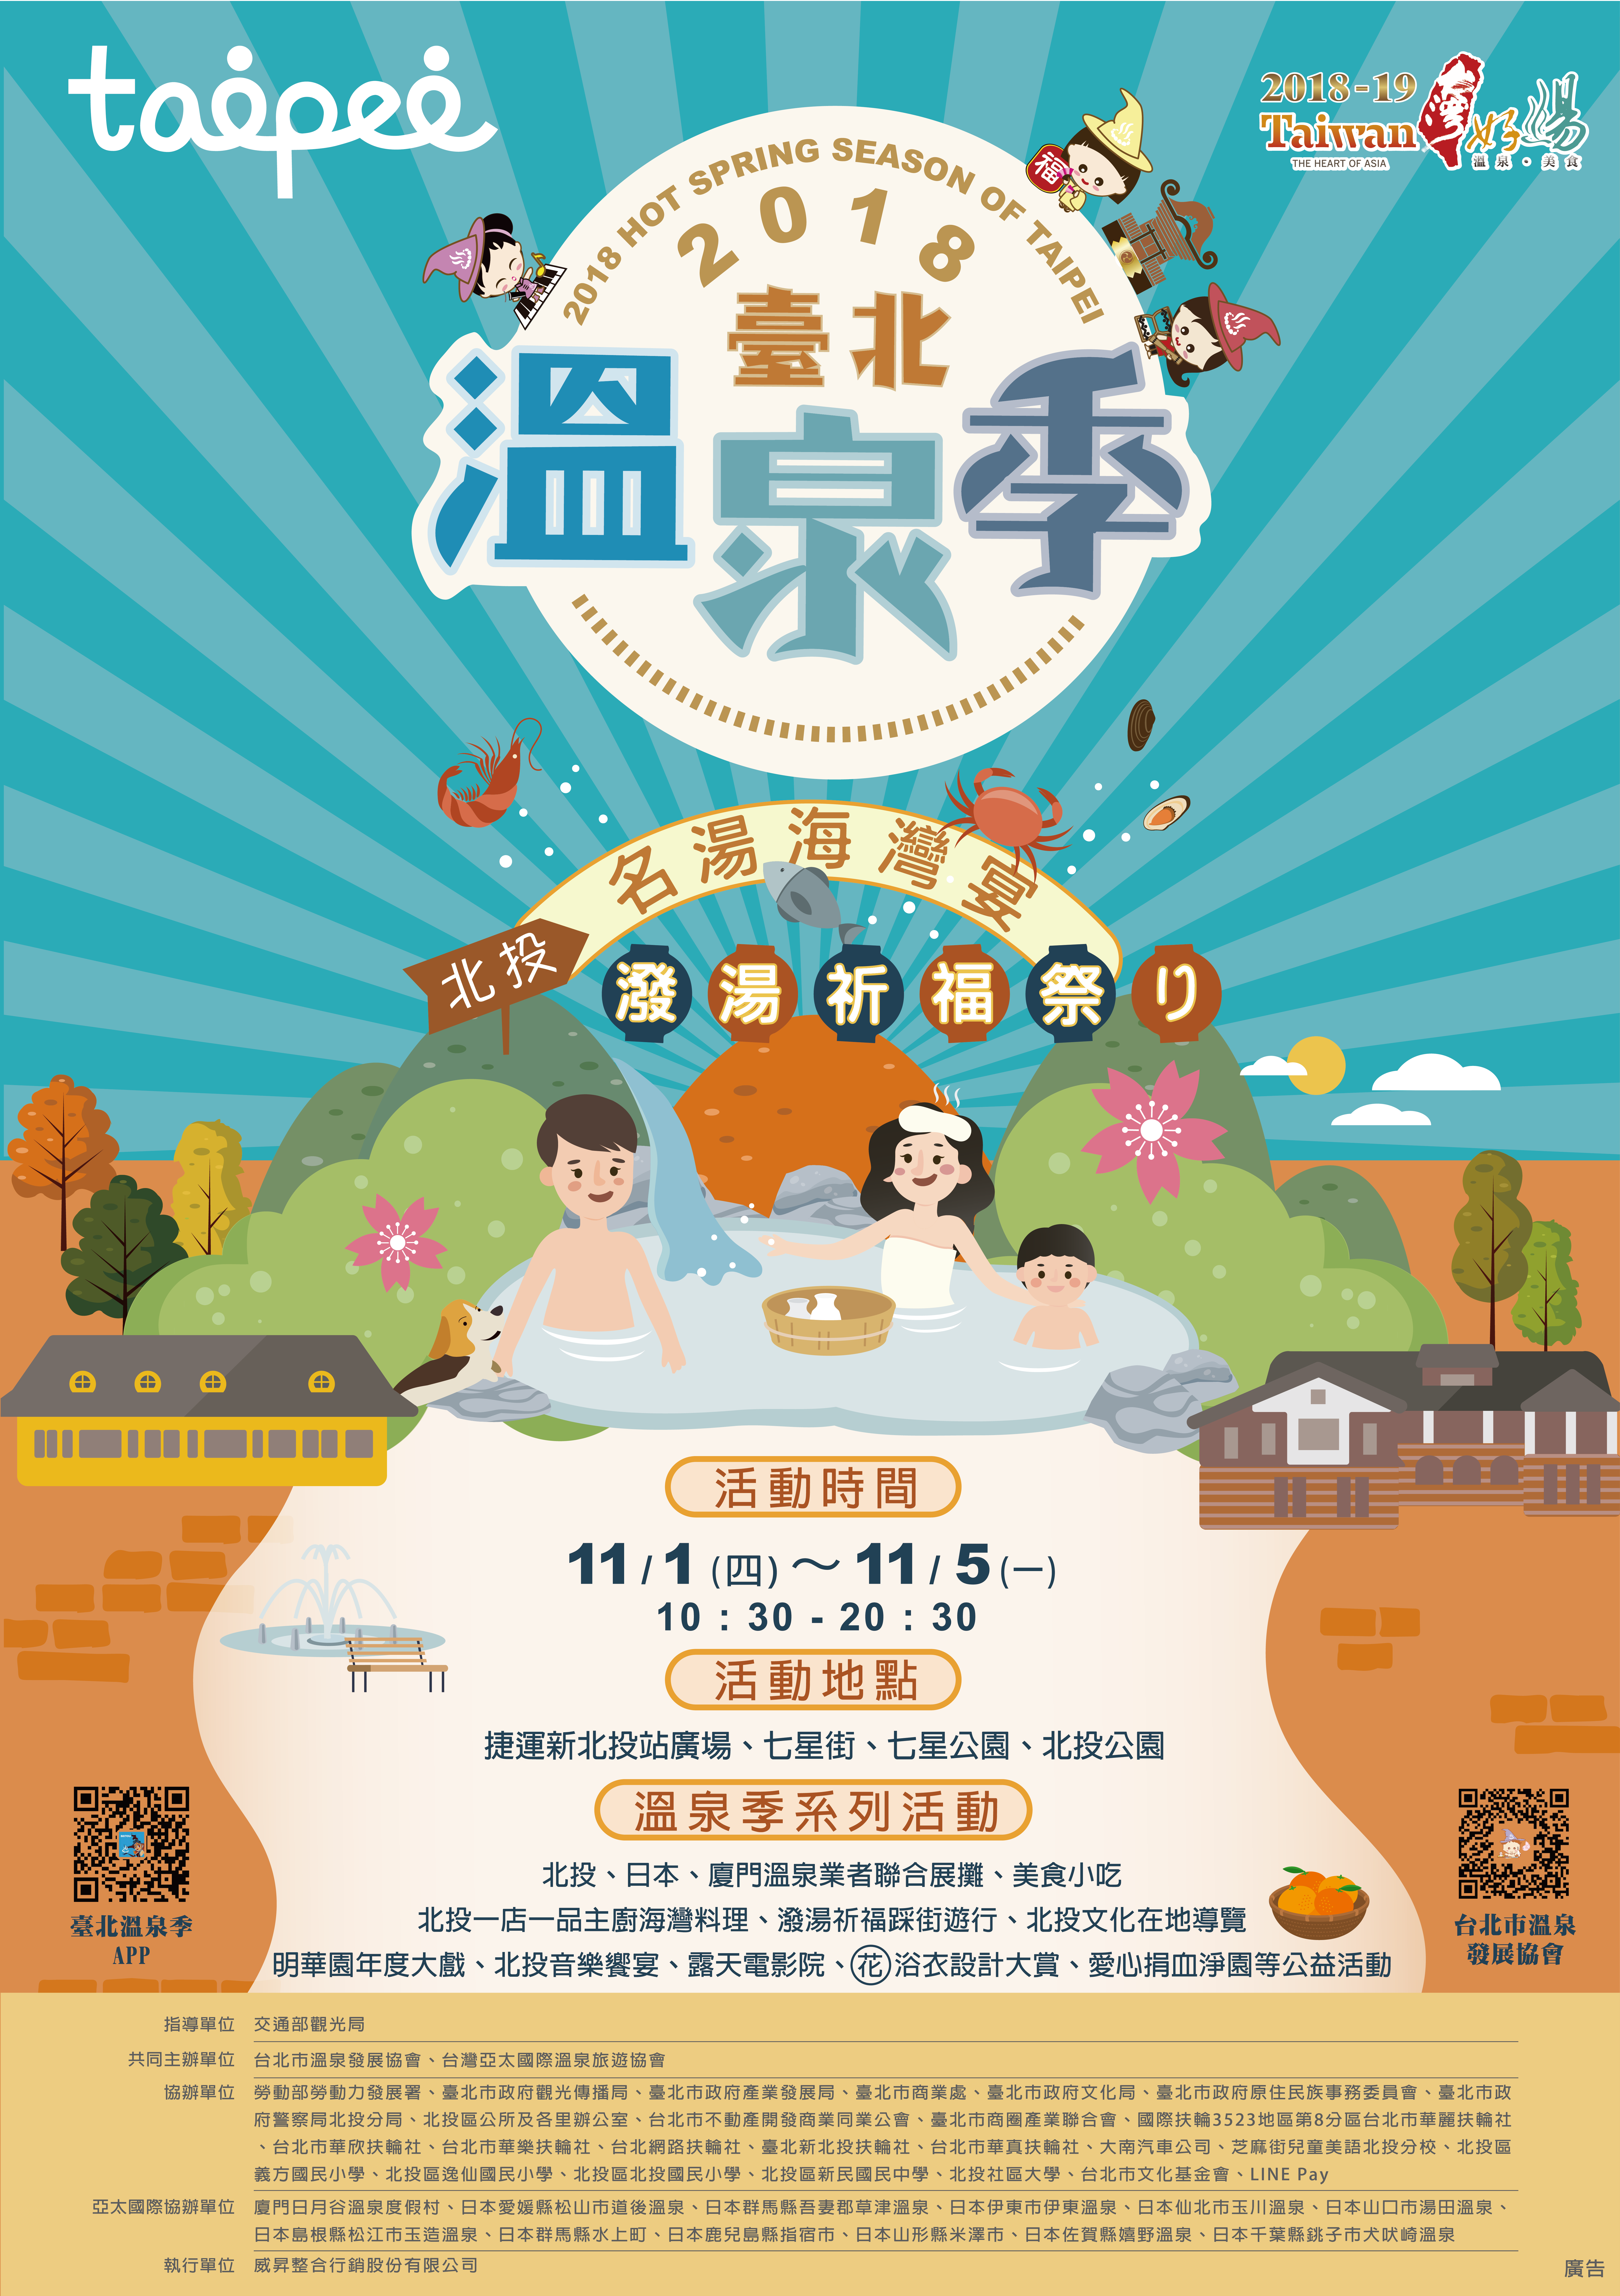 Discover Hot Spring Lifestyle at the 2018 Taipei Hot Spring Season